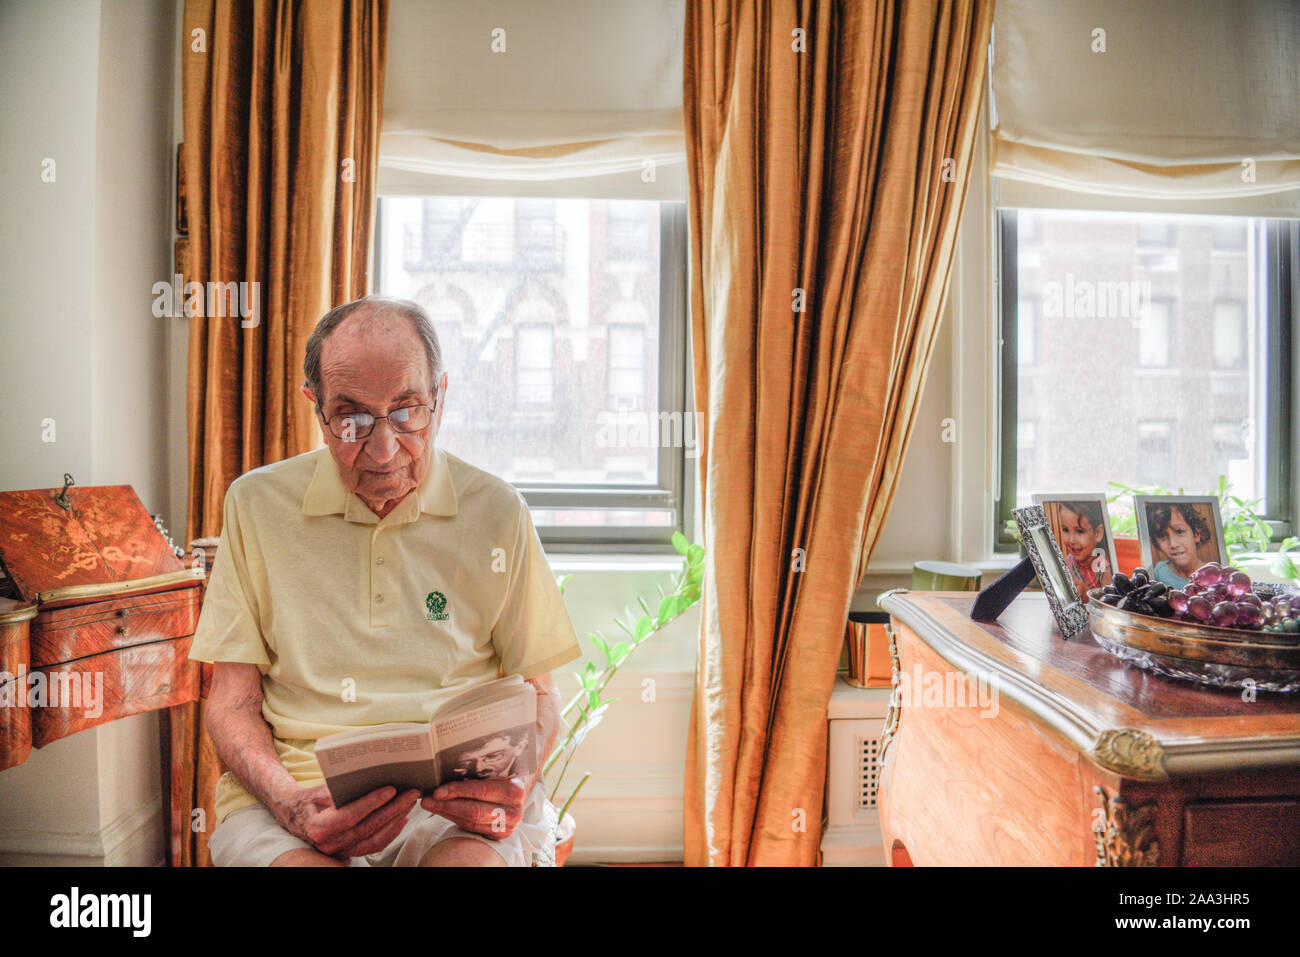 former Jewish refugee, CIA official and wine merchant Peter Sichel at his home at Manhattan, NYC Stock Photo